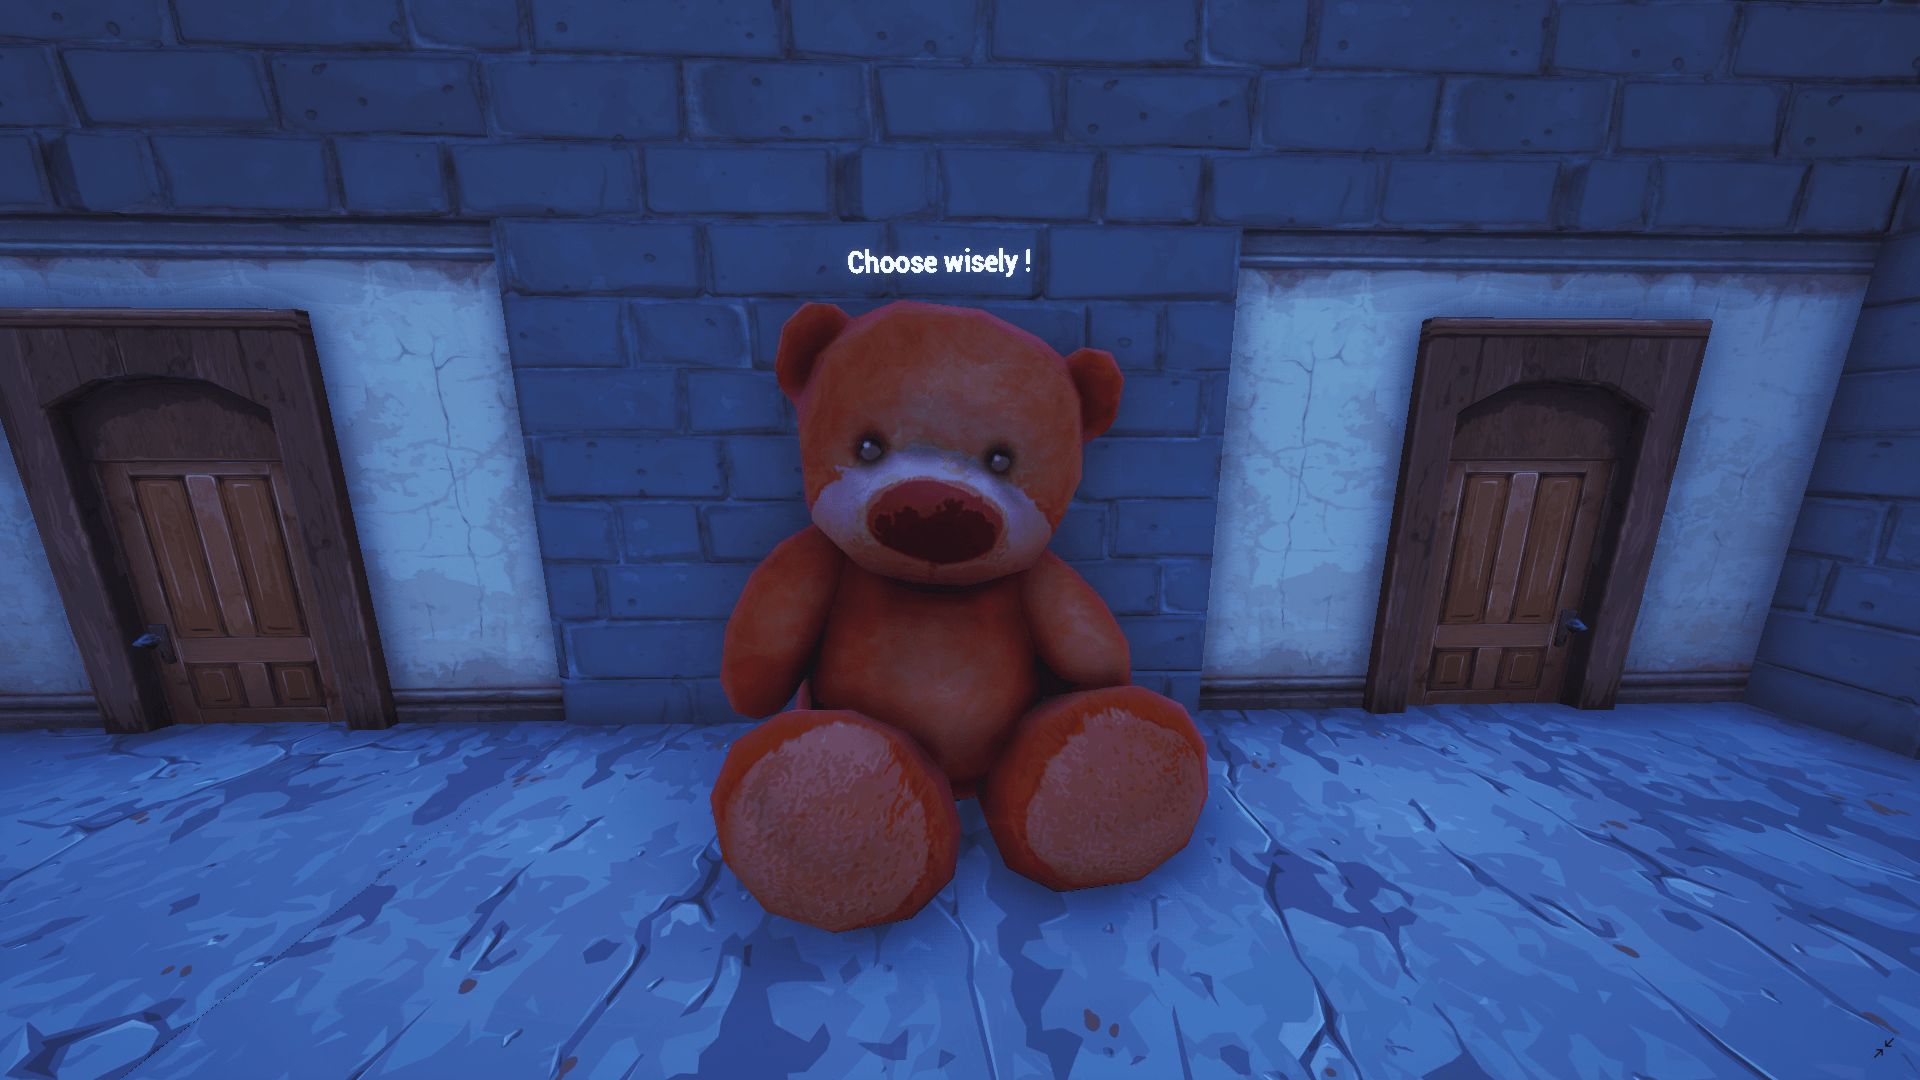 Where To Find The Teddy On Creative Fortnite Escape The Teddies 2 0 Fortnite Creative Map Code Dropnite